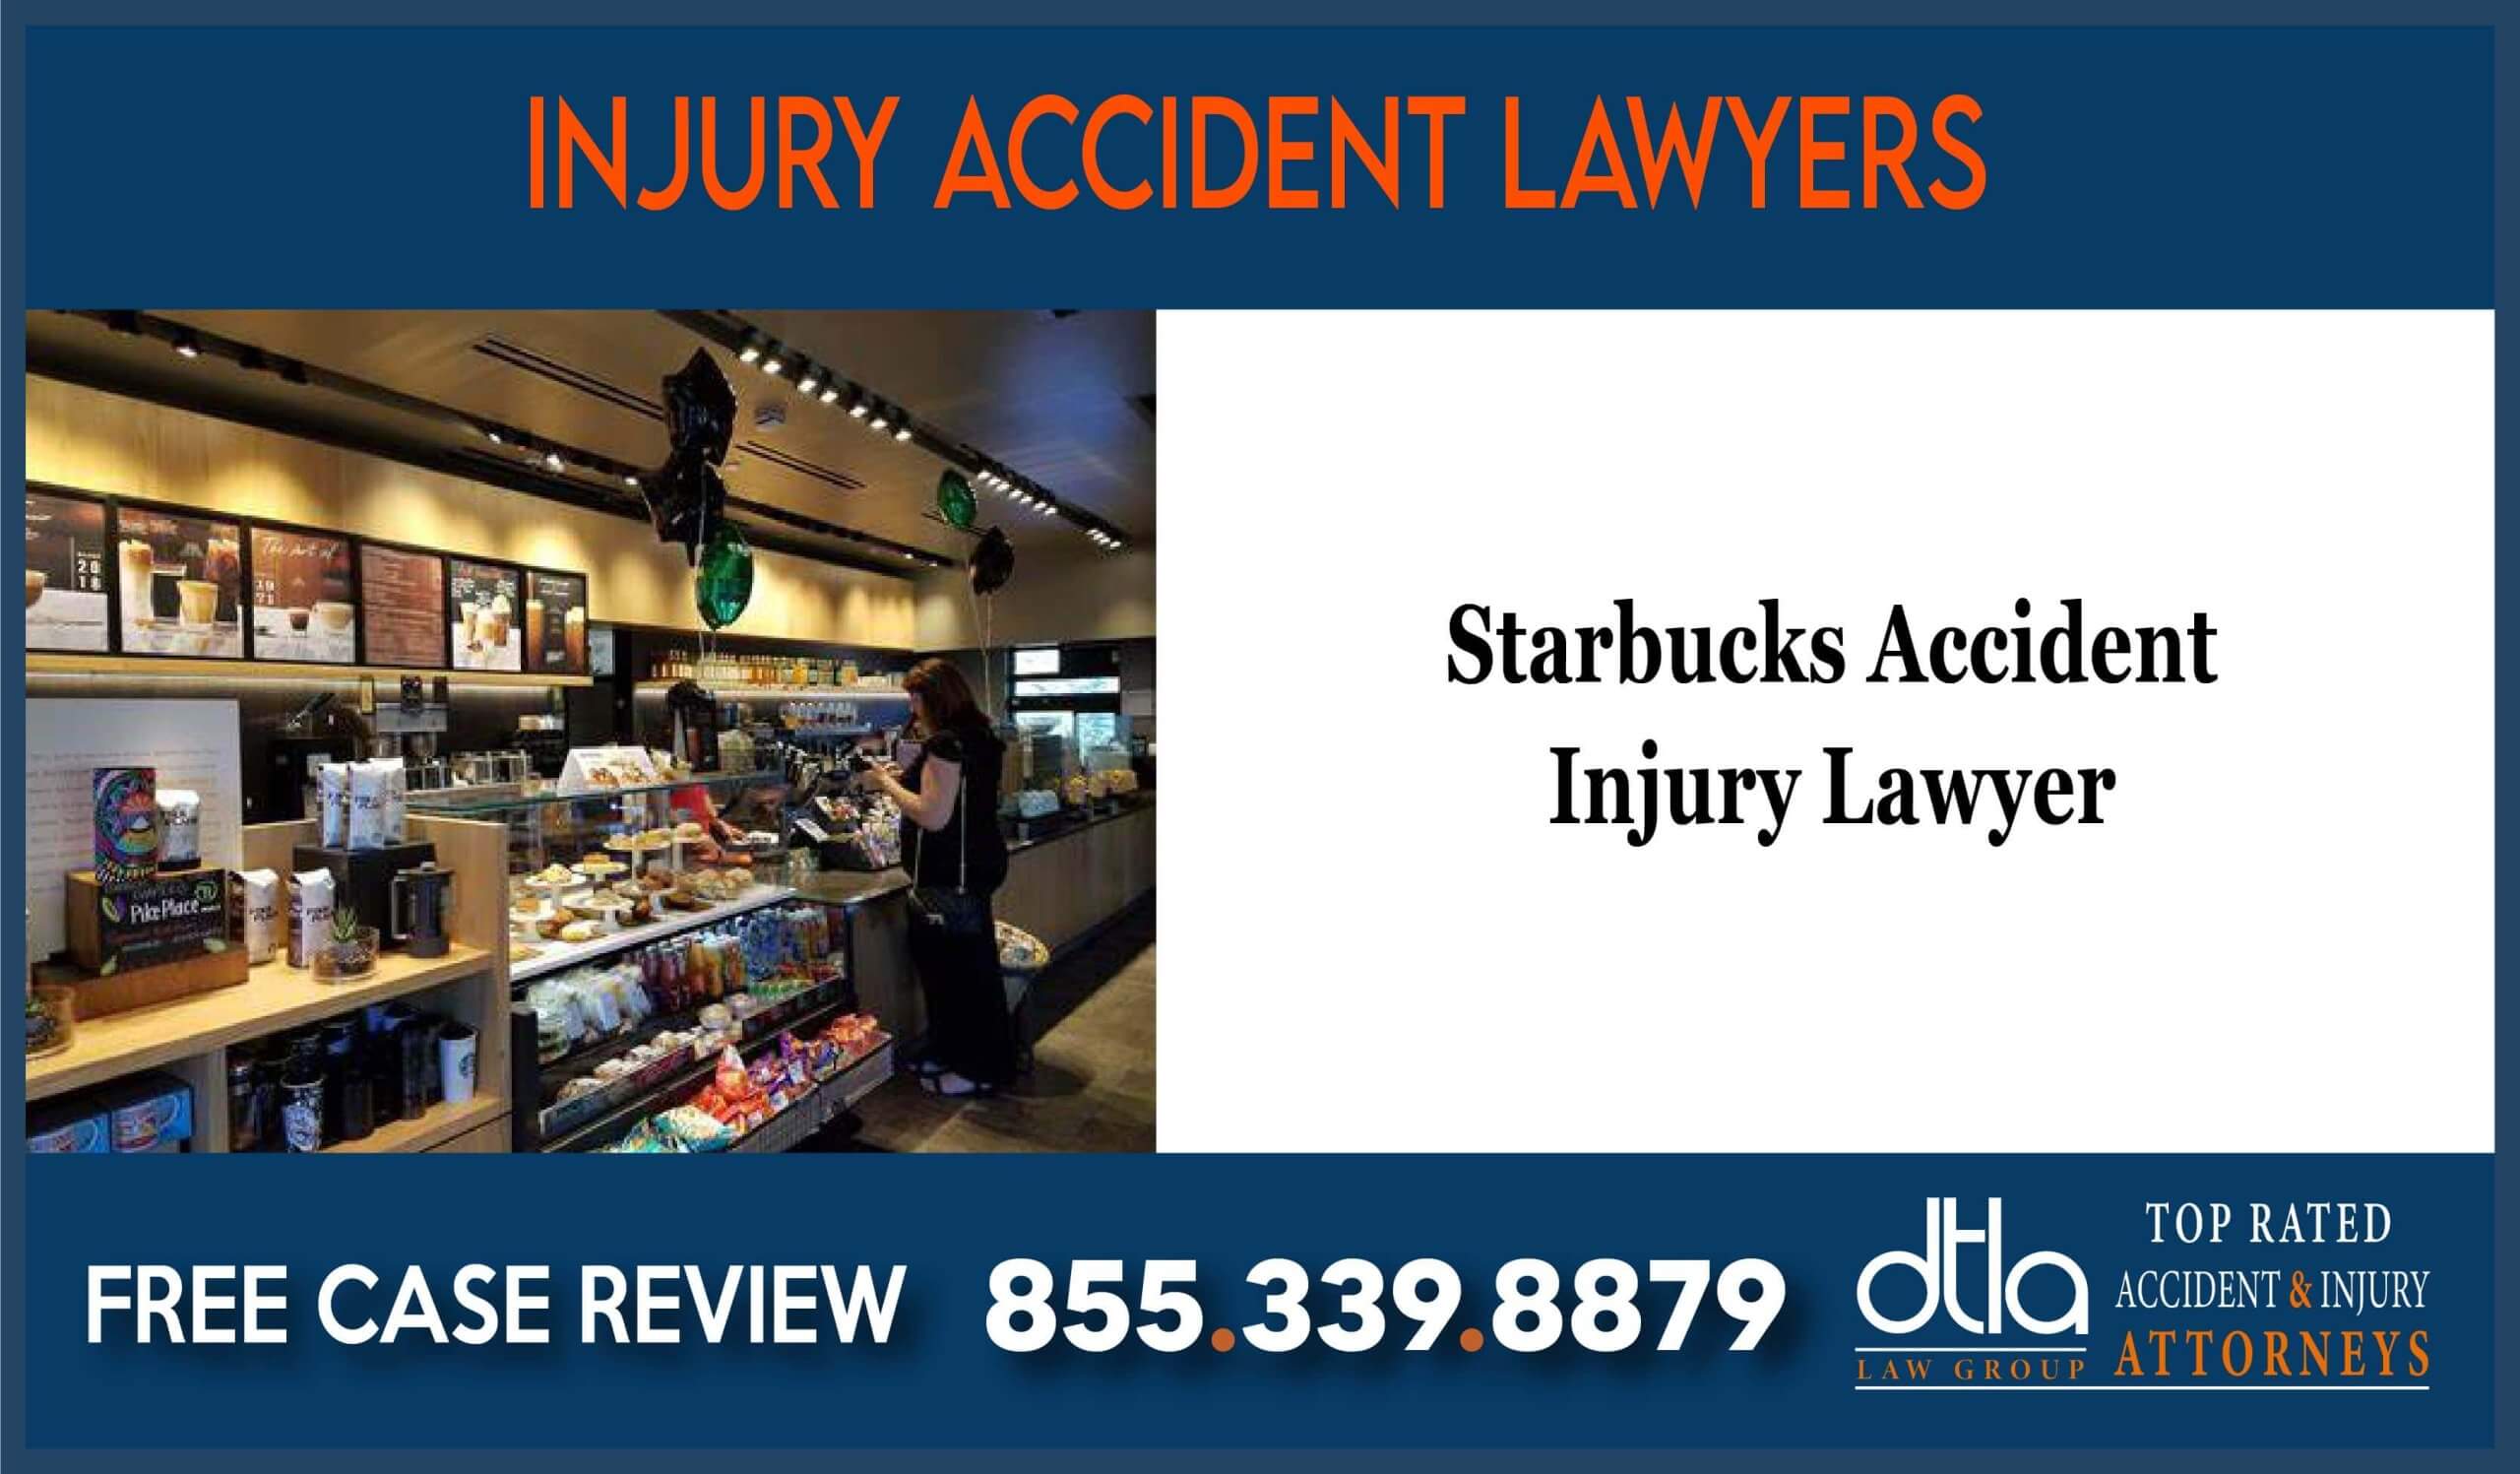 Starbucks Accident Injury Lawyer sue compensation incident lawsuit liability